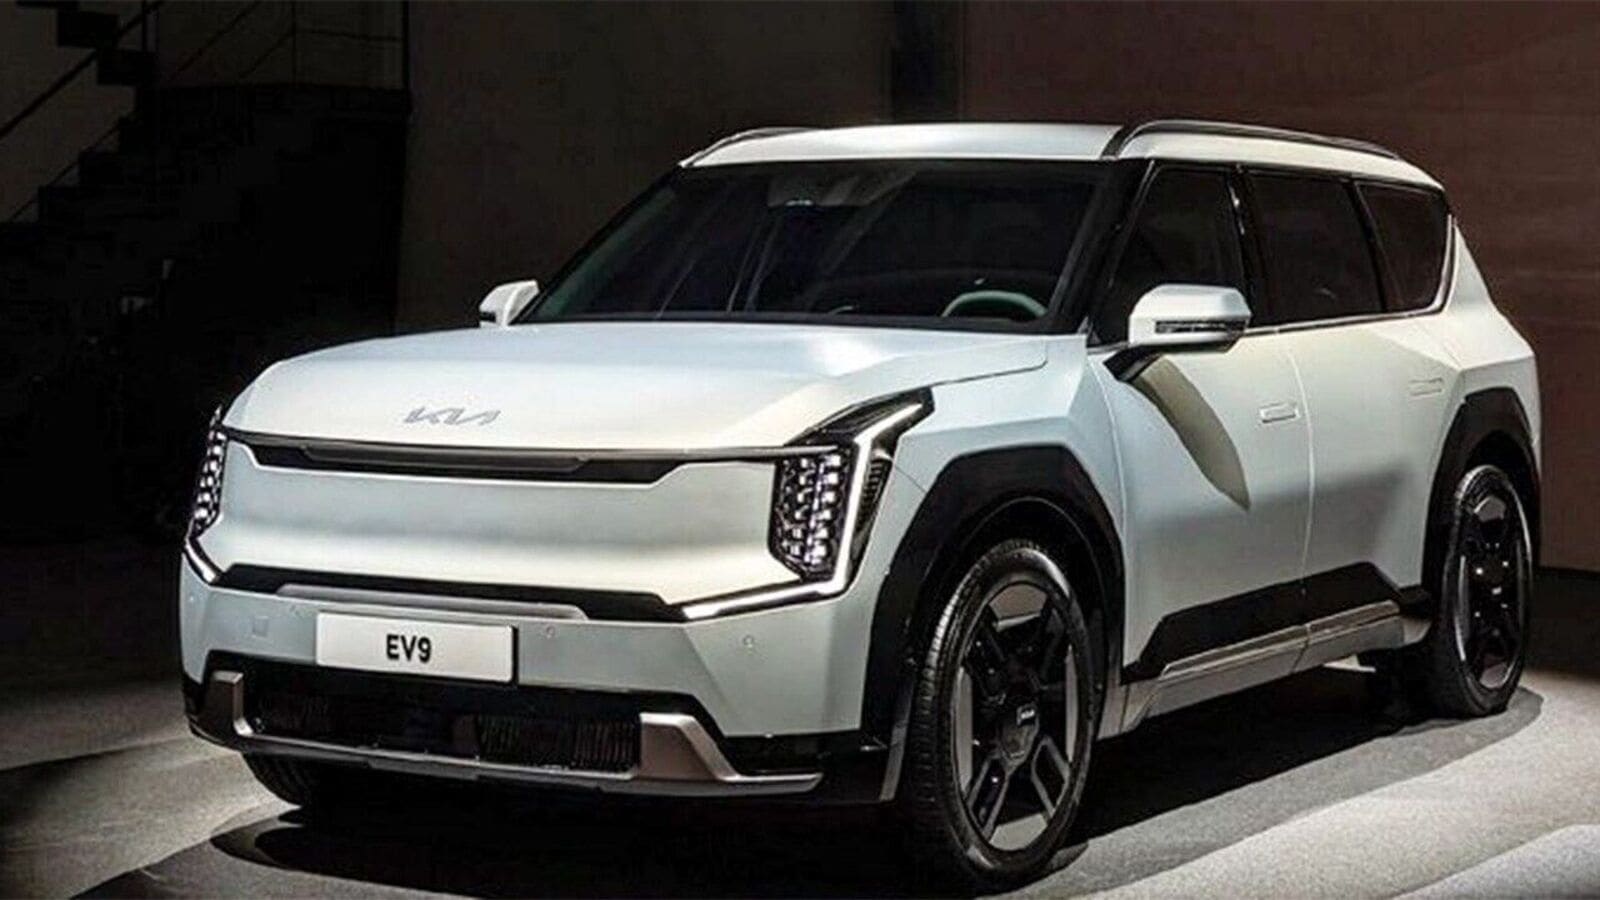 Kia EV9 leaked hours before debut; This is how the electric SUV will look like